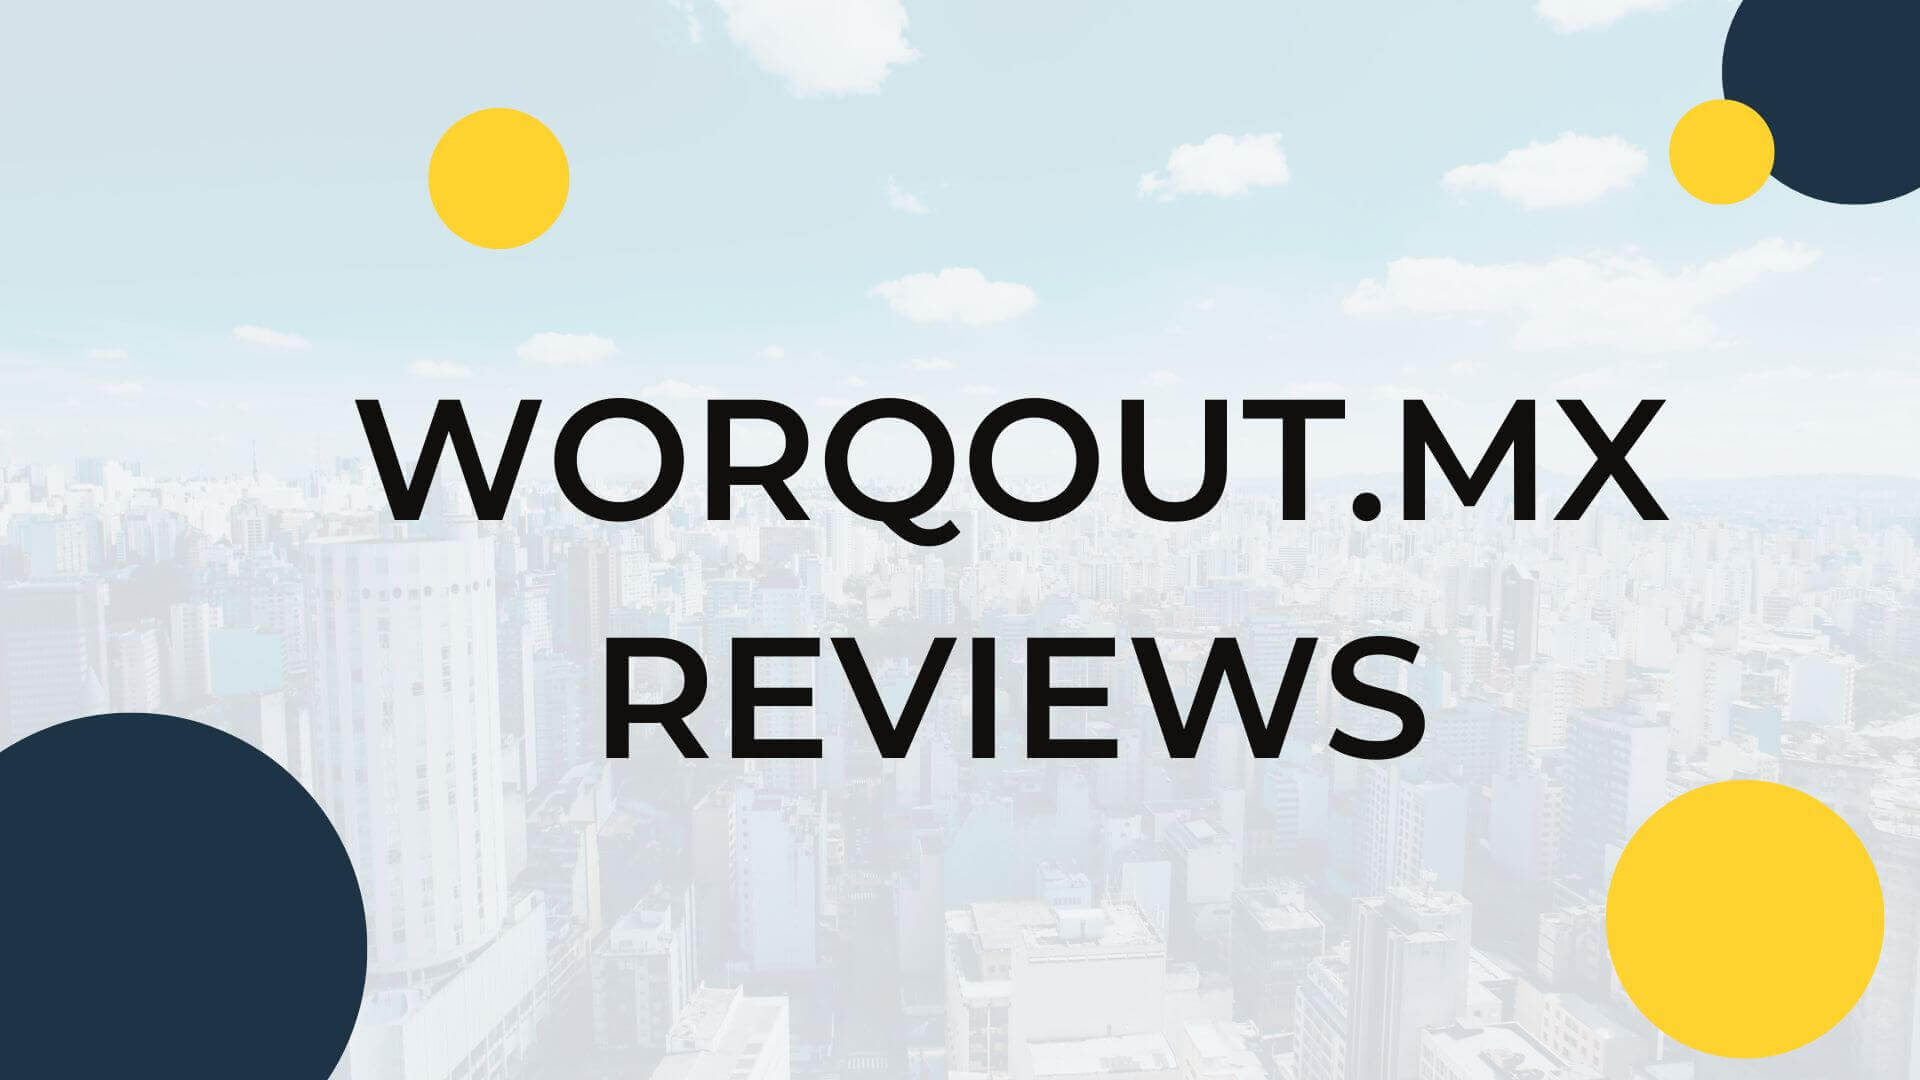 Worqout.mx Reviews (September 2022) Cost, Feature, and Availability!